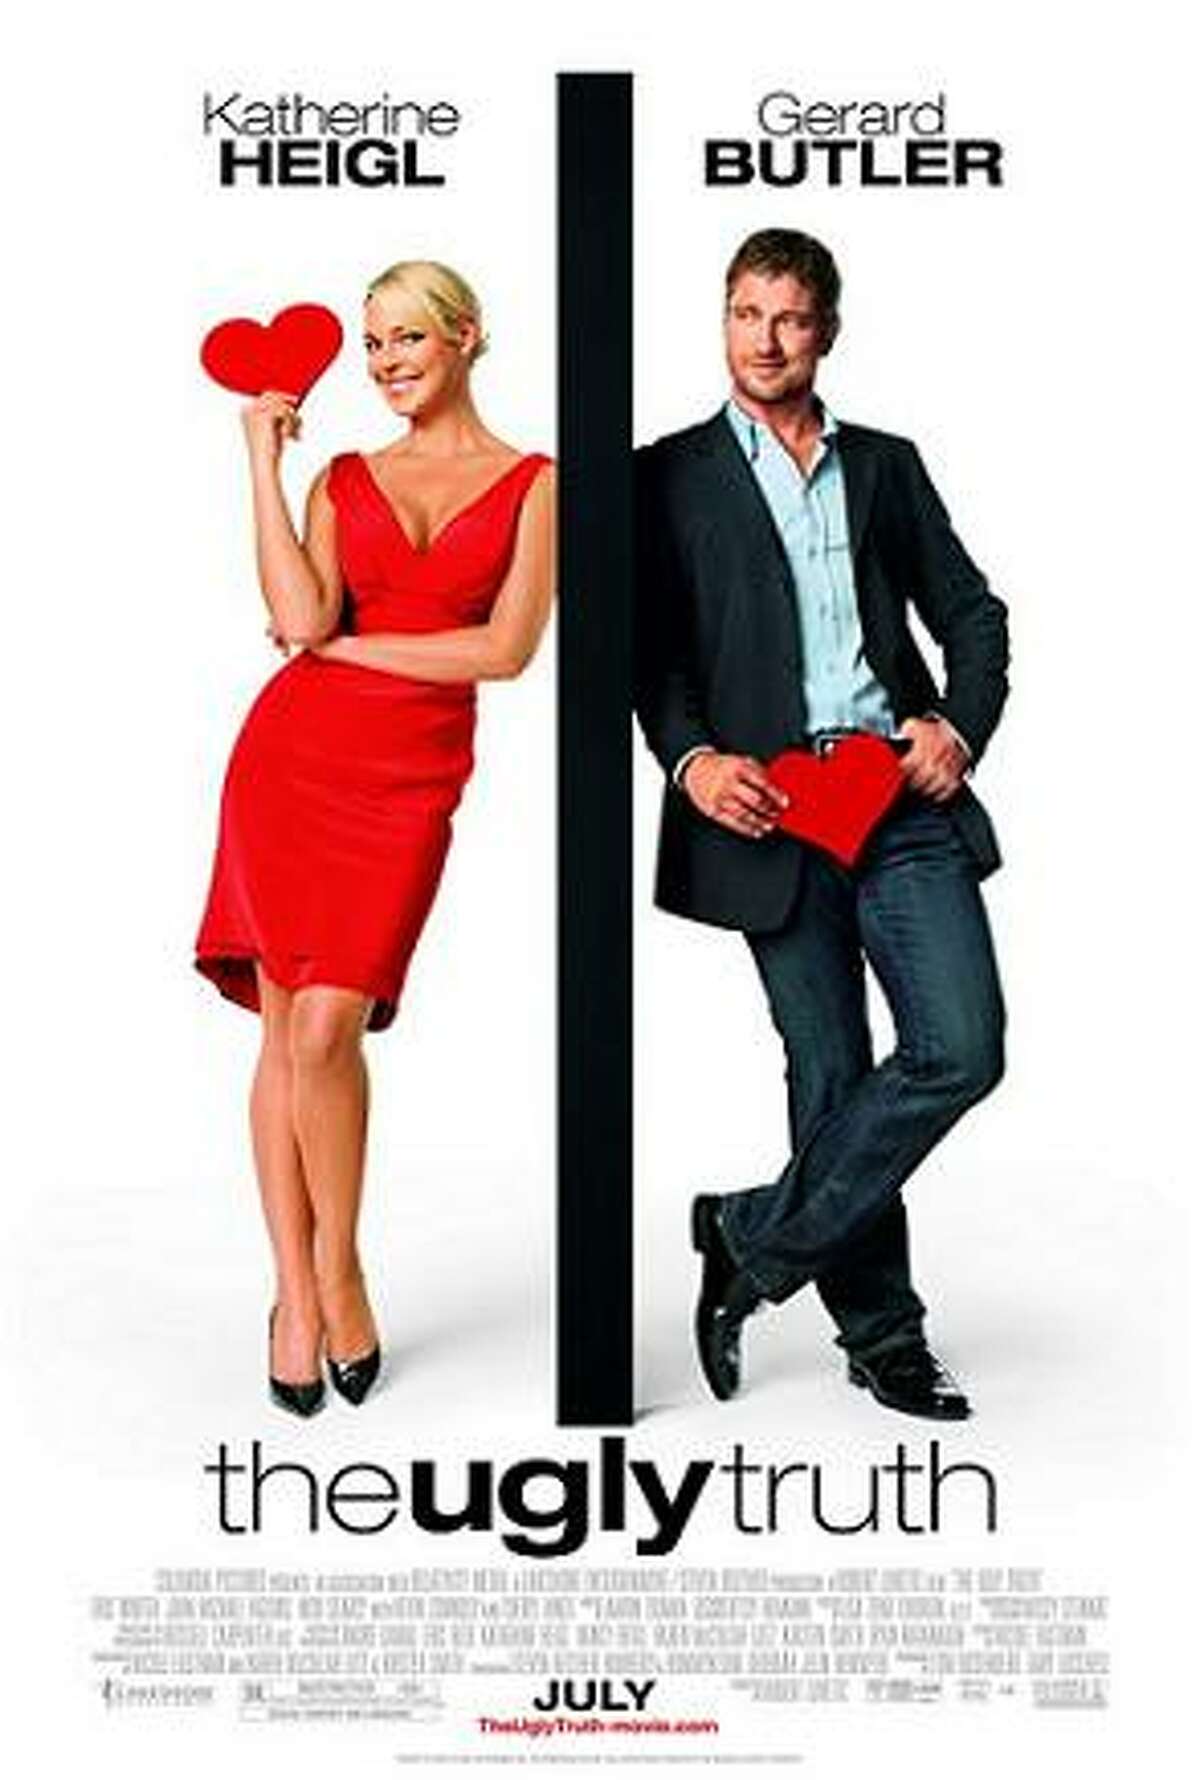 The Ugly Truth (2009) Starring: Katherine Heigl, Gerard Butler, Eric Winter Audience Score: 60  Tomatometer Score: 13 Source: Rotten Tomatoes 